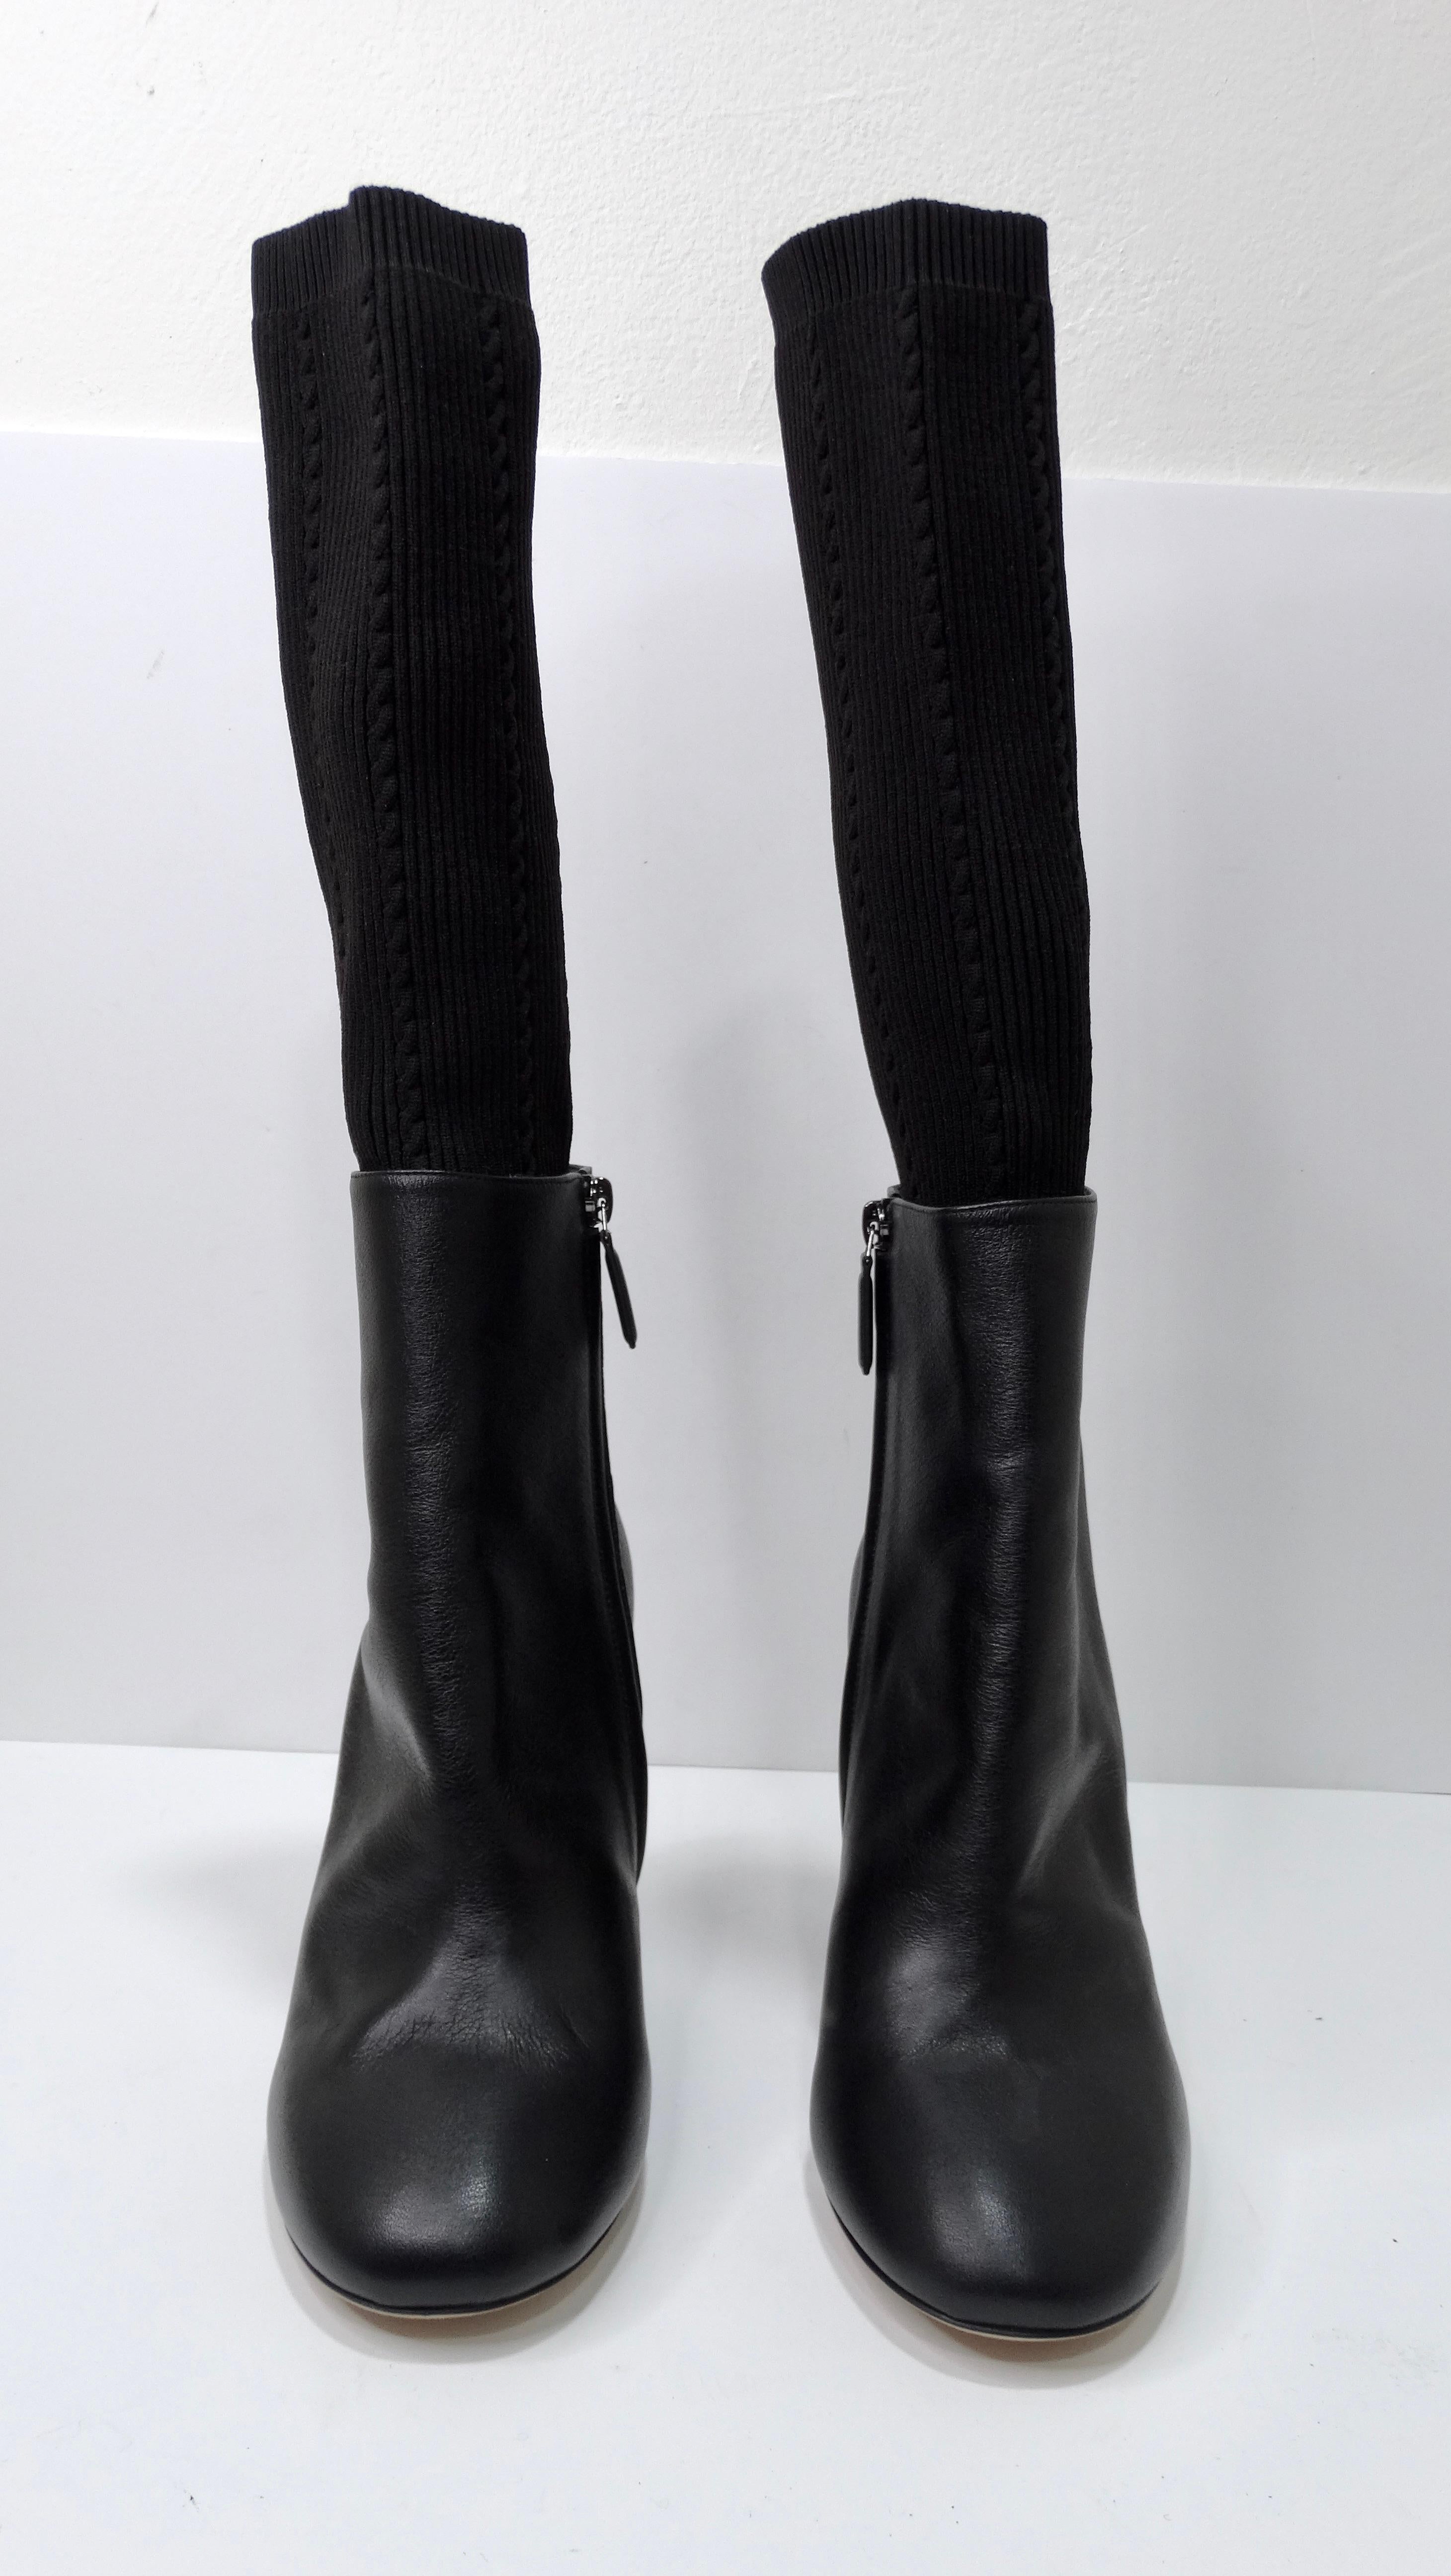 These are iconic and classic pair of CHANEL boots that need to be in your wardrobe for the fall and winter! You can recycle these every year as the classic color and silhouette will never fail you. Put a spin on the everyday black boots and get